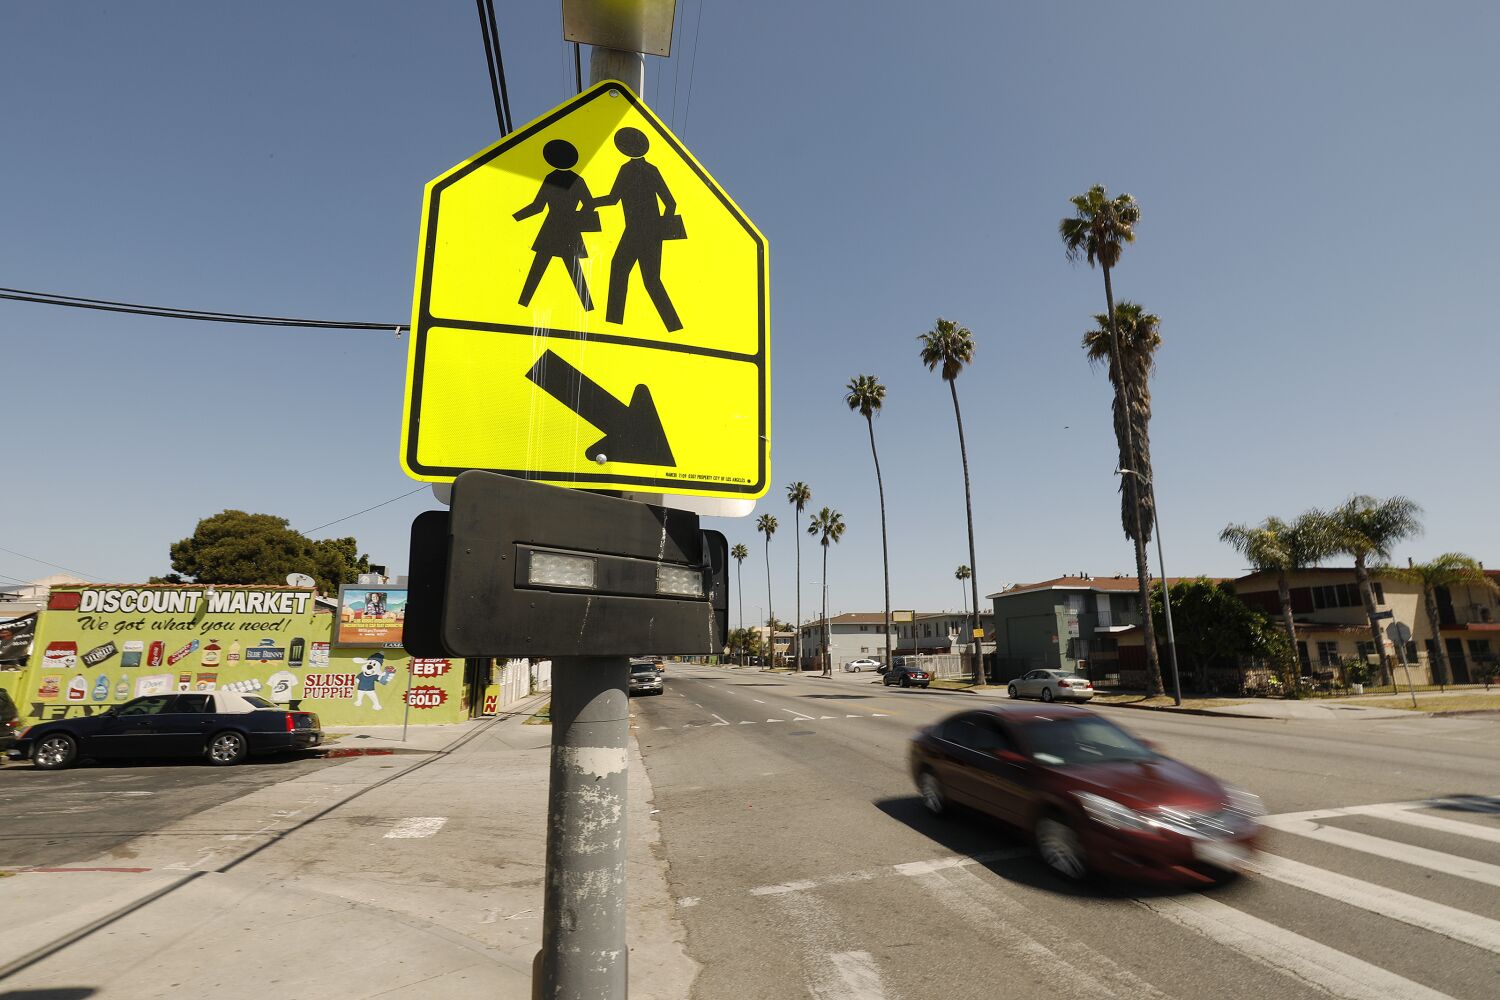 Opinion: Speed cameras save lives. California is long overdue to try them